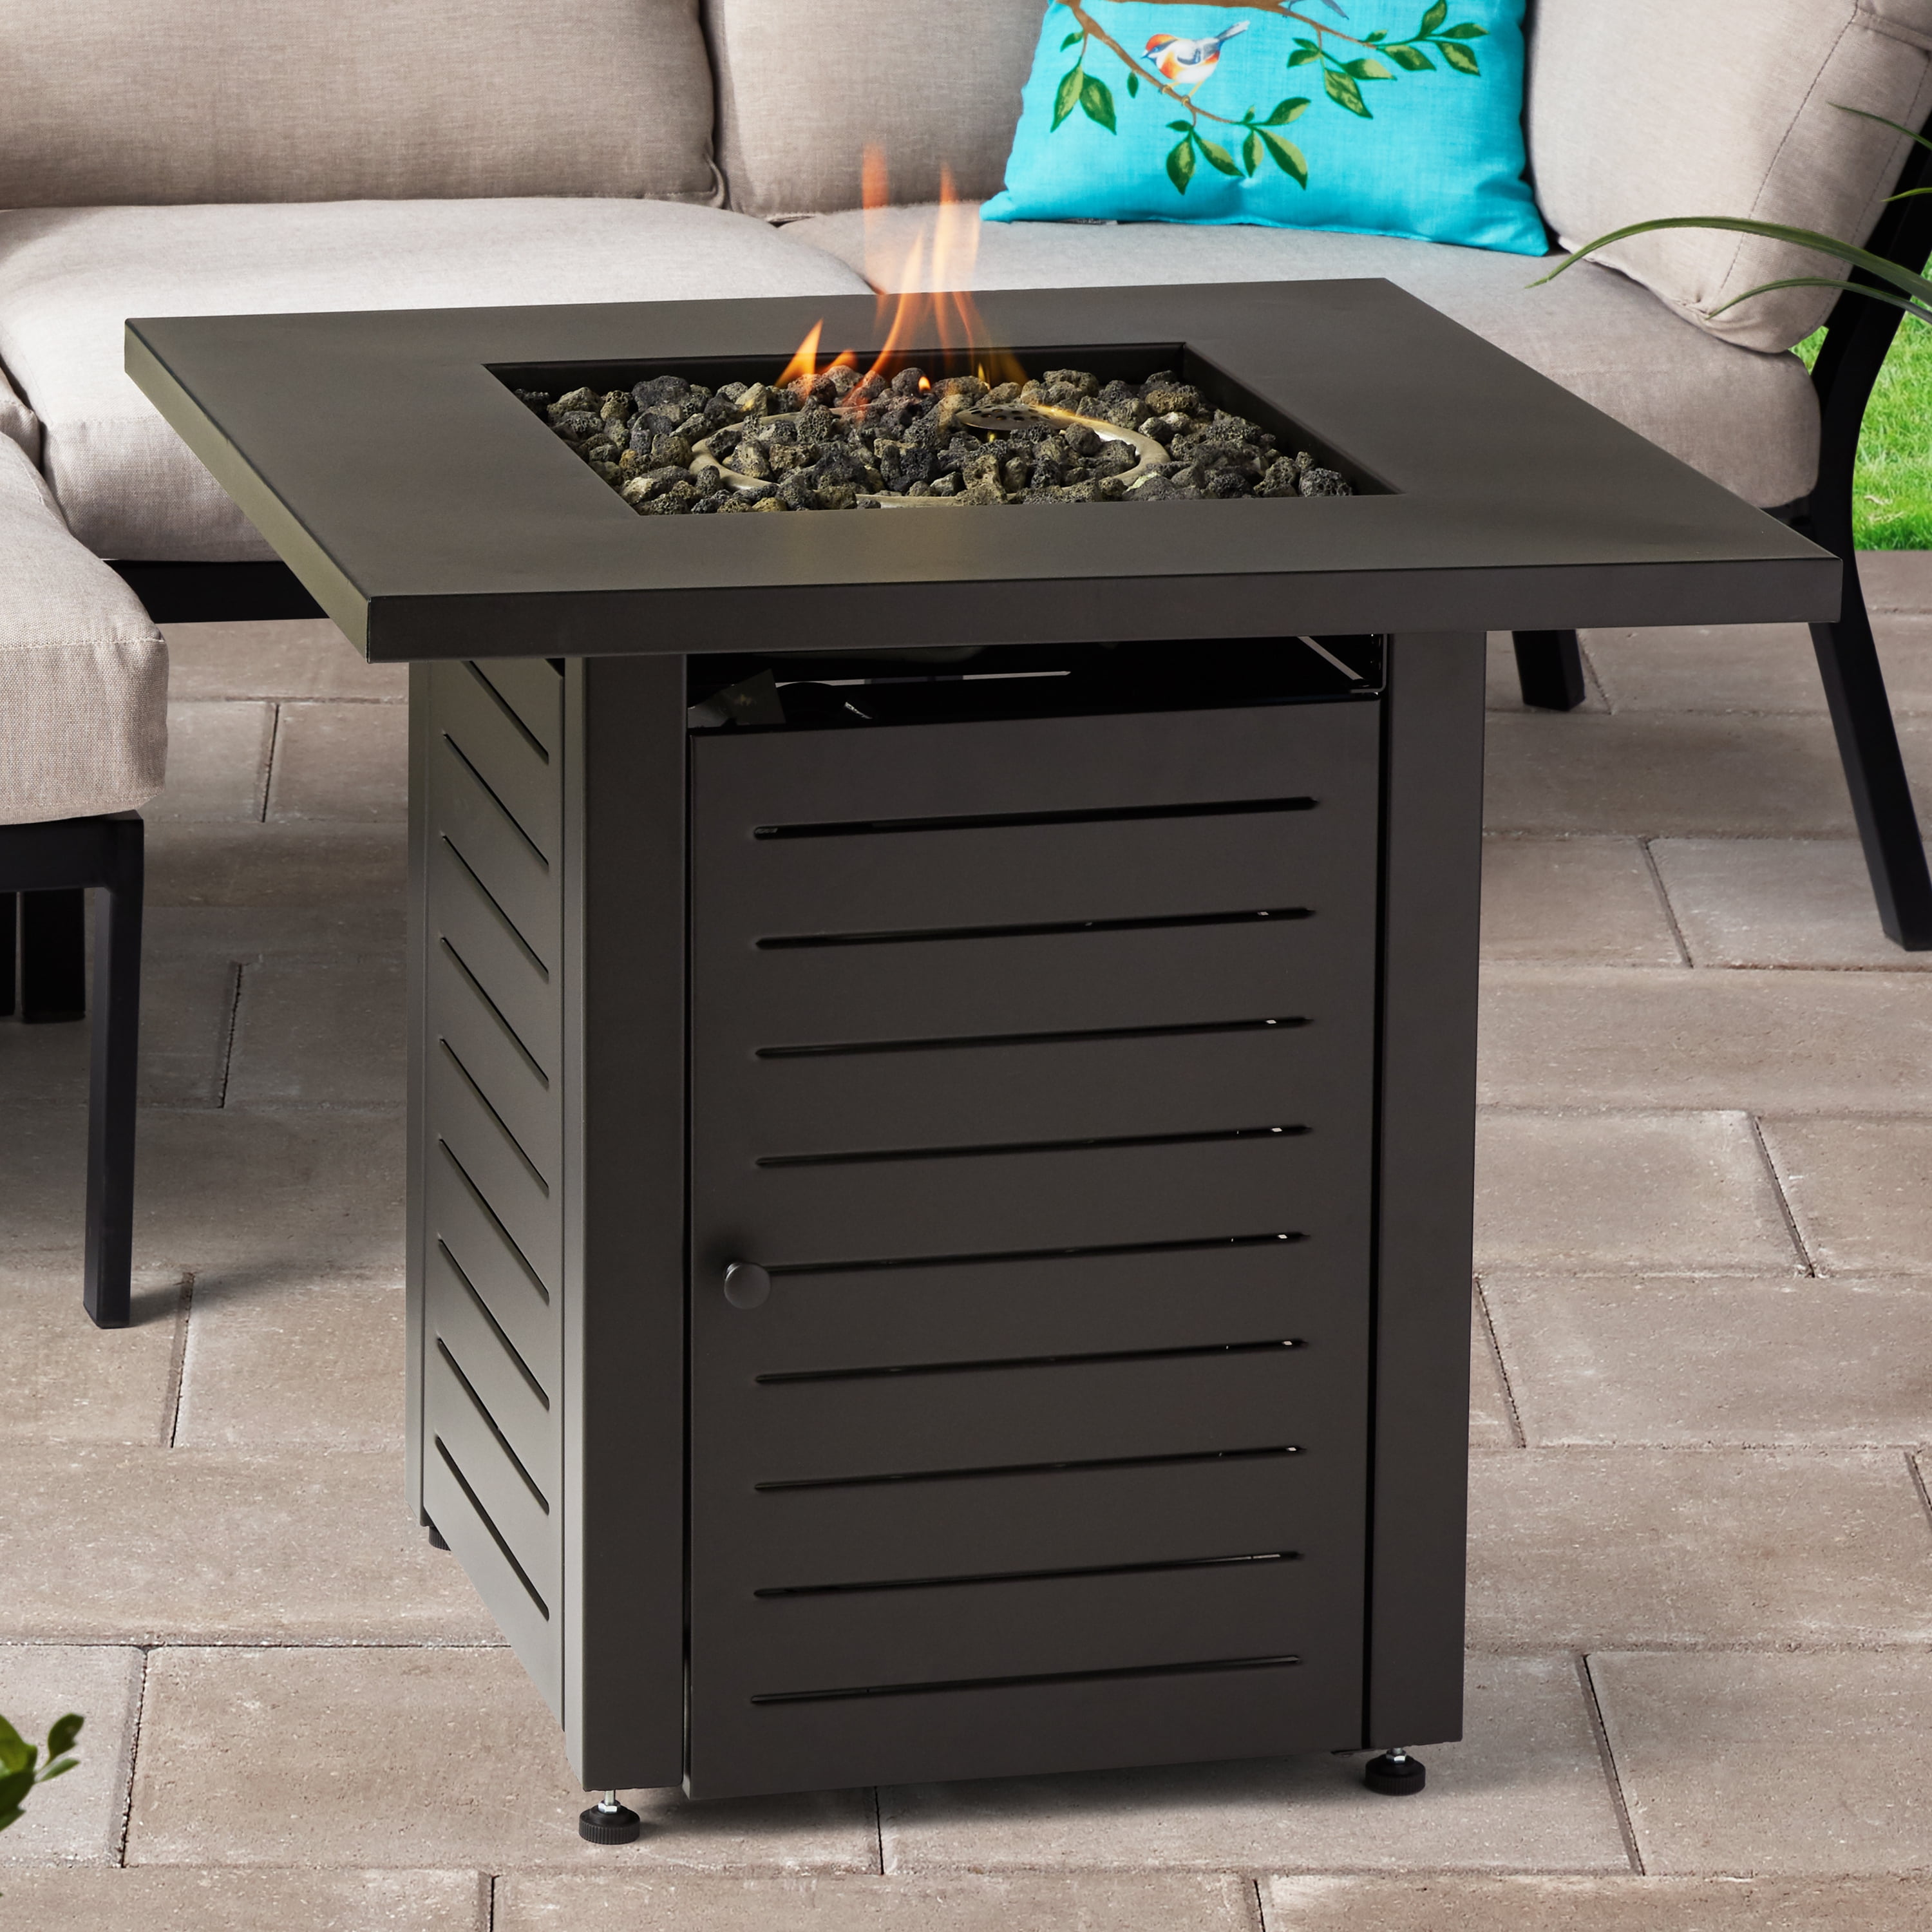 Mainstays 28" Square 50000 BTU Propane Gas Fire Pit Table with Lava Rocks, Metal Lid and Protective Cover